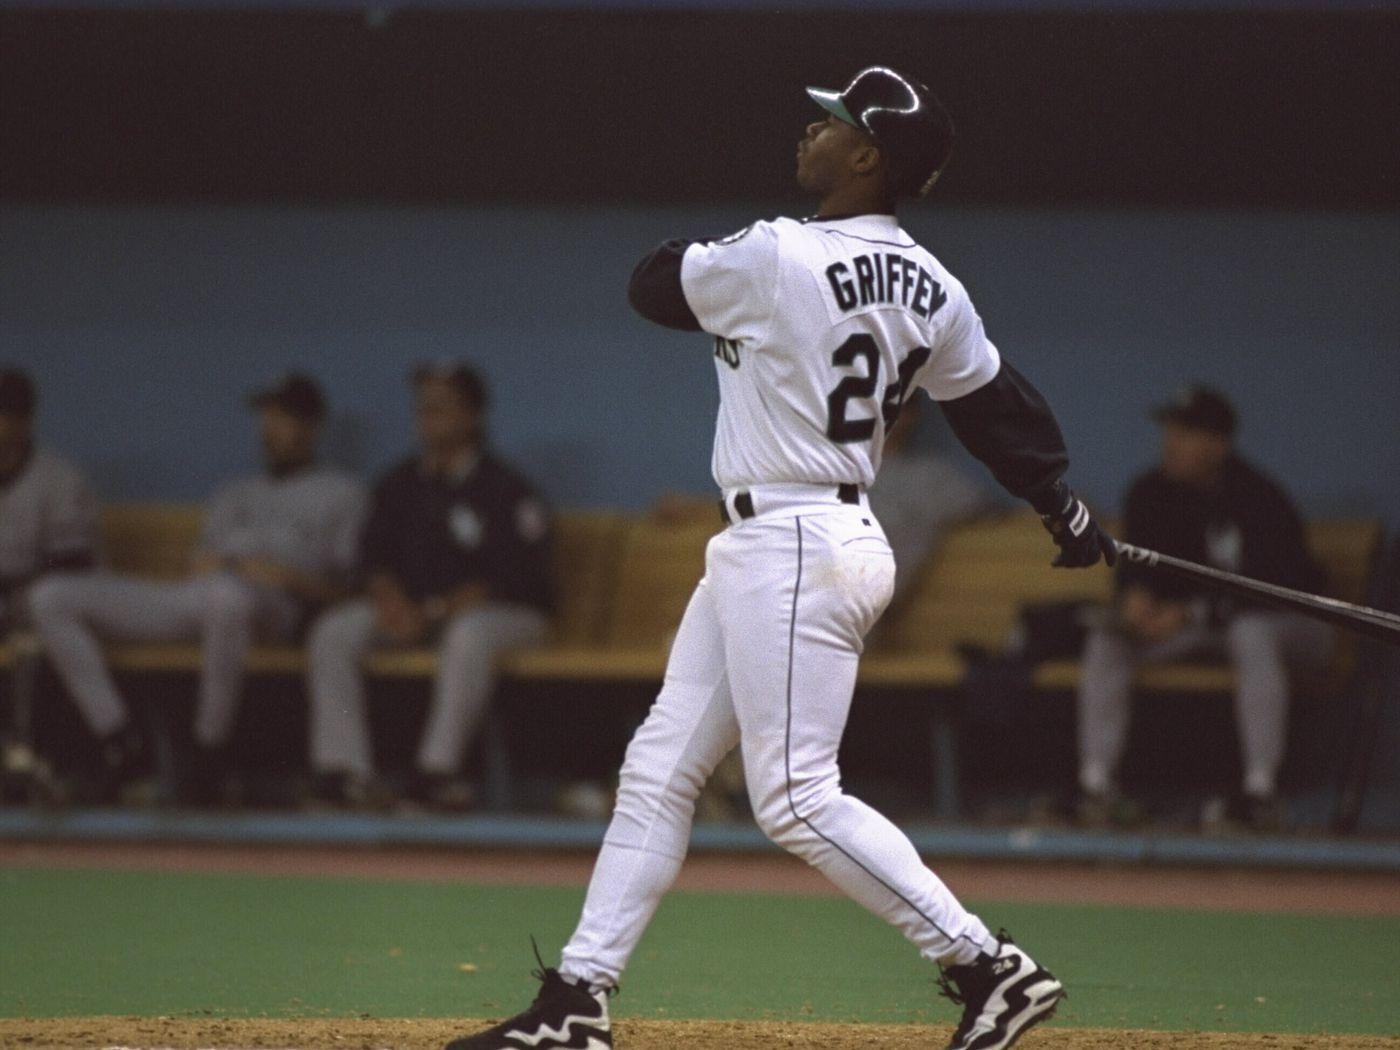 A timeline of the best highlights from Ken Griffey Jr.'s remarkable